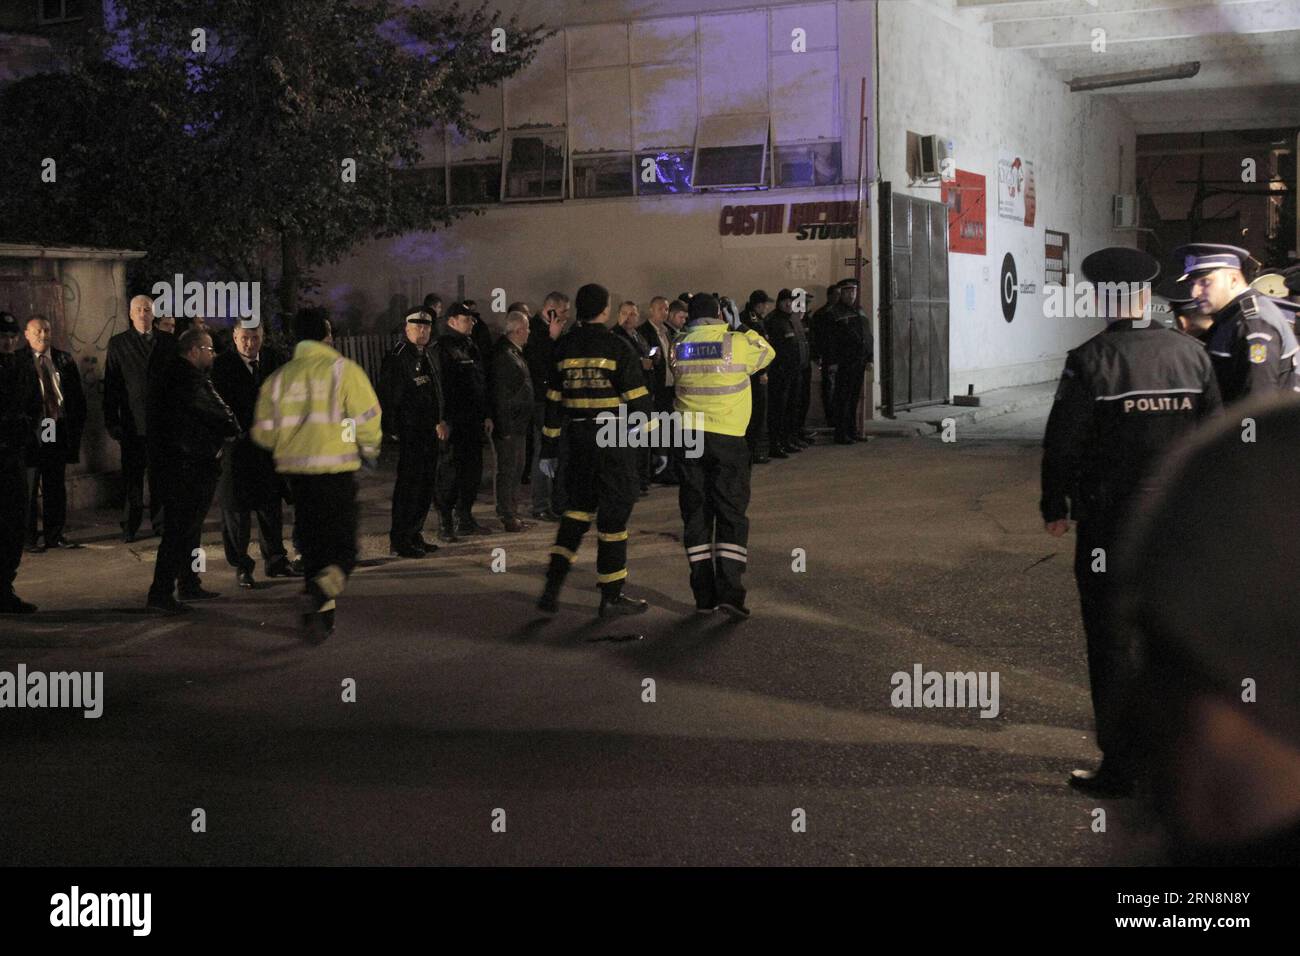 (151031) -- BUCHAREST, Oct. 31, 2015 -- Firemen and policemen gather at the nightclub which caught fire in Bucharest, capital city of Romania, Oct. 31, 2015. The nightclub fire late Friday followed by explosions has already caused 26 dead and some 180 wounded in downtown Bucharest, authorities announced early Saturday. ) ROMANIA-BUCHAREST-NIGHTCLUB-FIRE GabrielxPetrescu PUBLICATIONxNOTxINxCHN Rumänien: Tote und Verletzte nach Feuer in Nachtclub in Bukarest   Bucharest OCT 31 2015 firemen and Policemen gather AT The Night Club Which Caught Fire in Bucharest Capital City of Romania OCT 31 2015 T Stock Photo